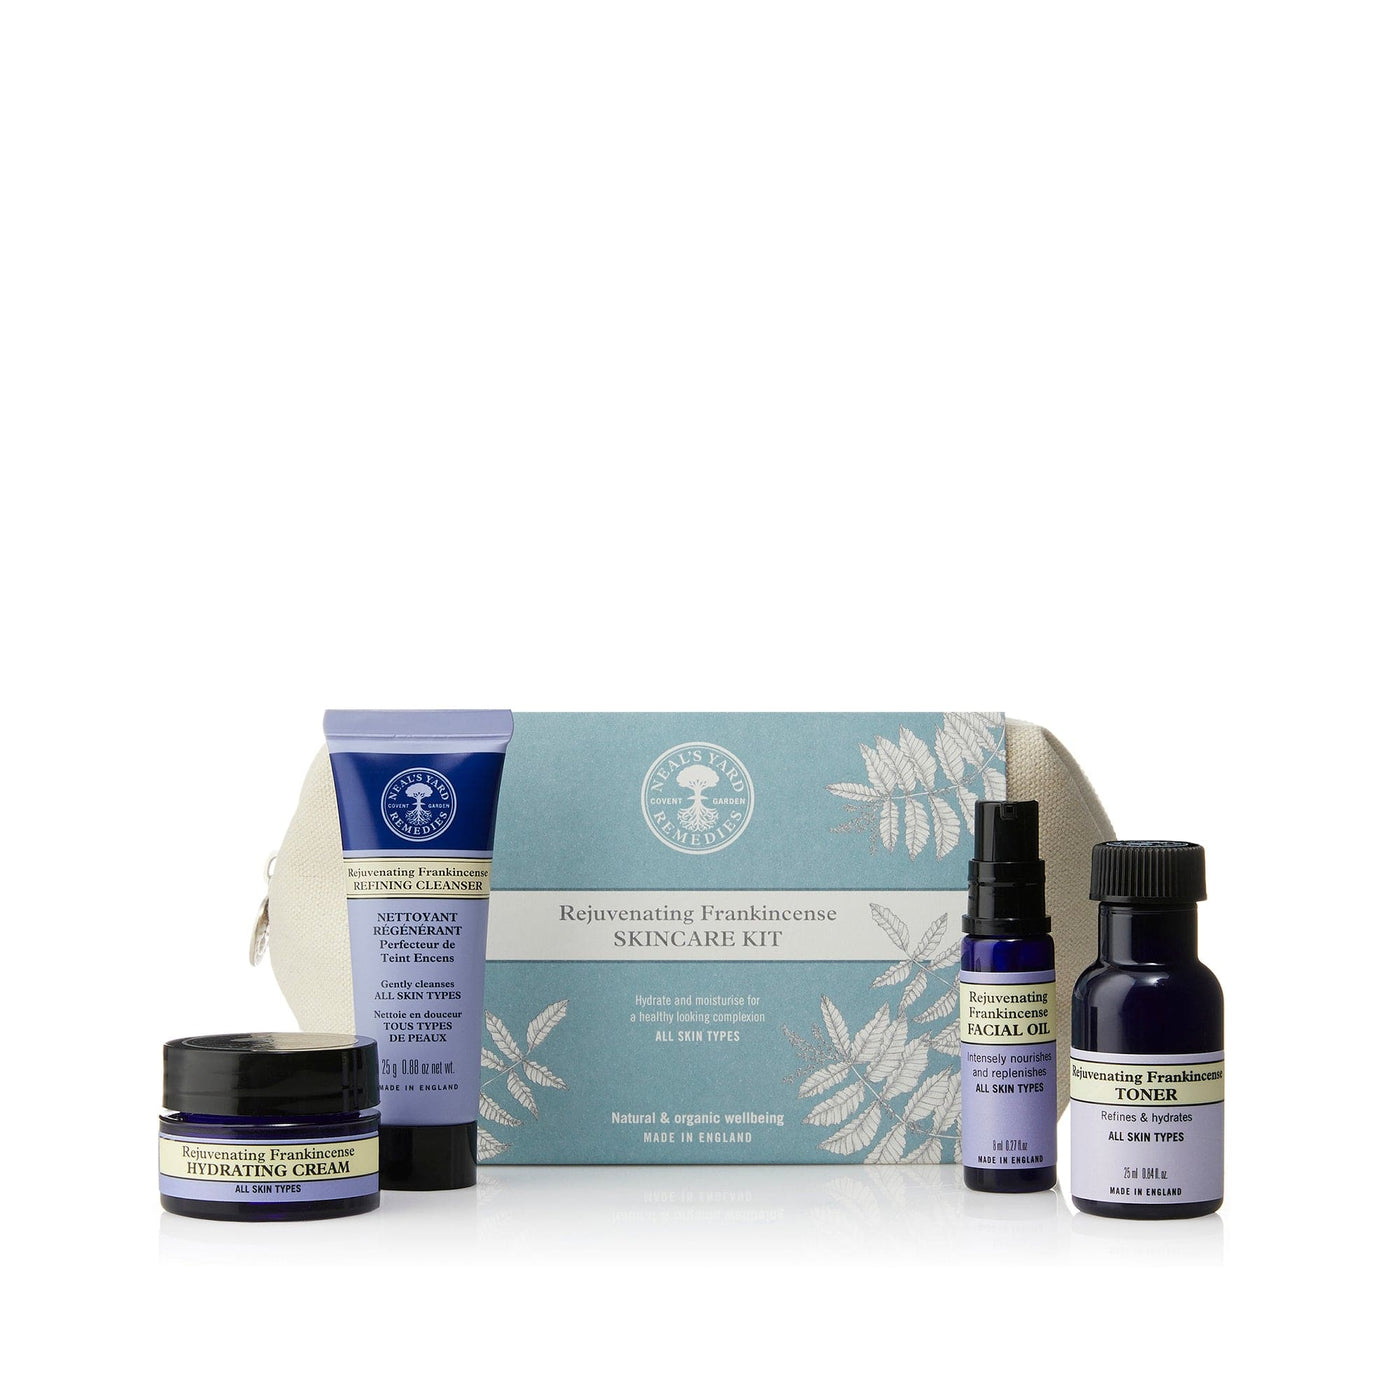 Neal's Yard Remedies Gifts & Collections Rejuvenating Frankincense Skincare Kit